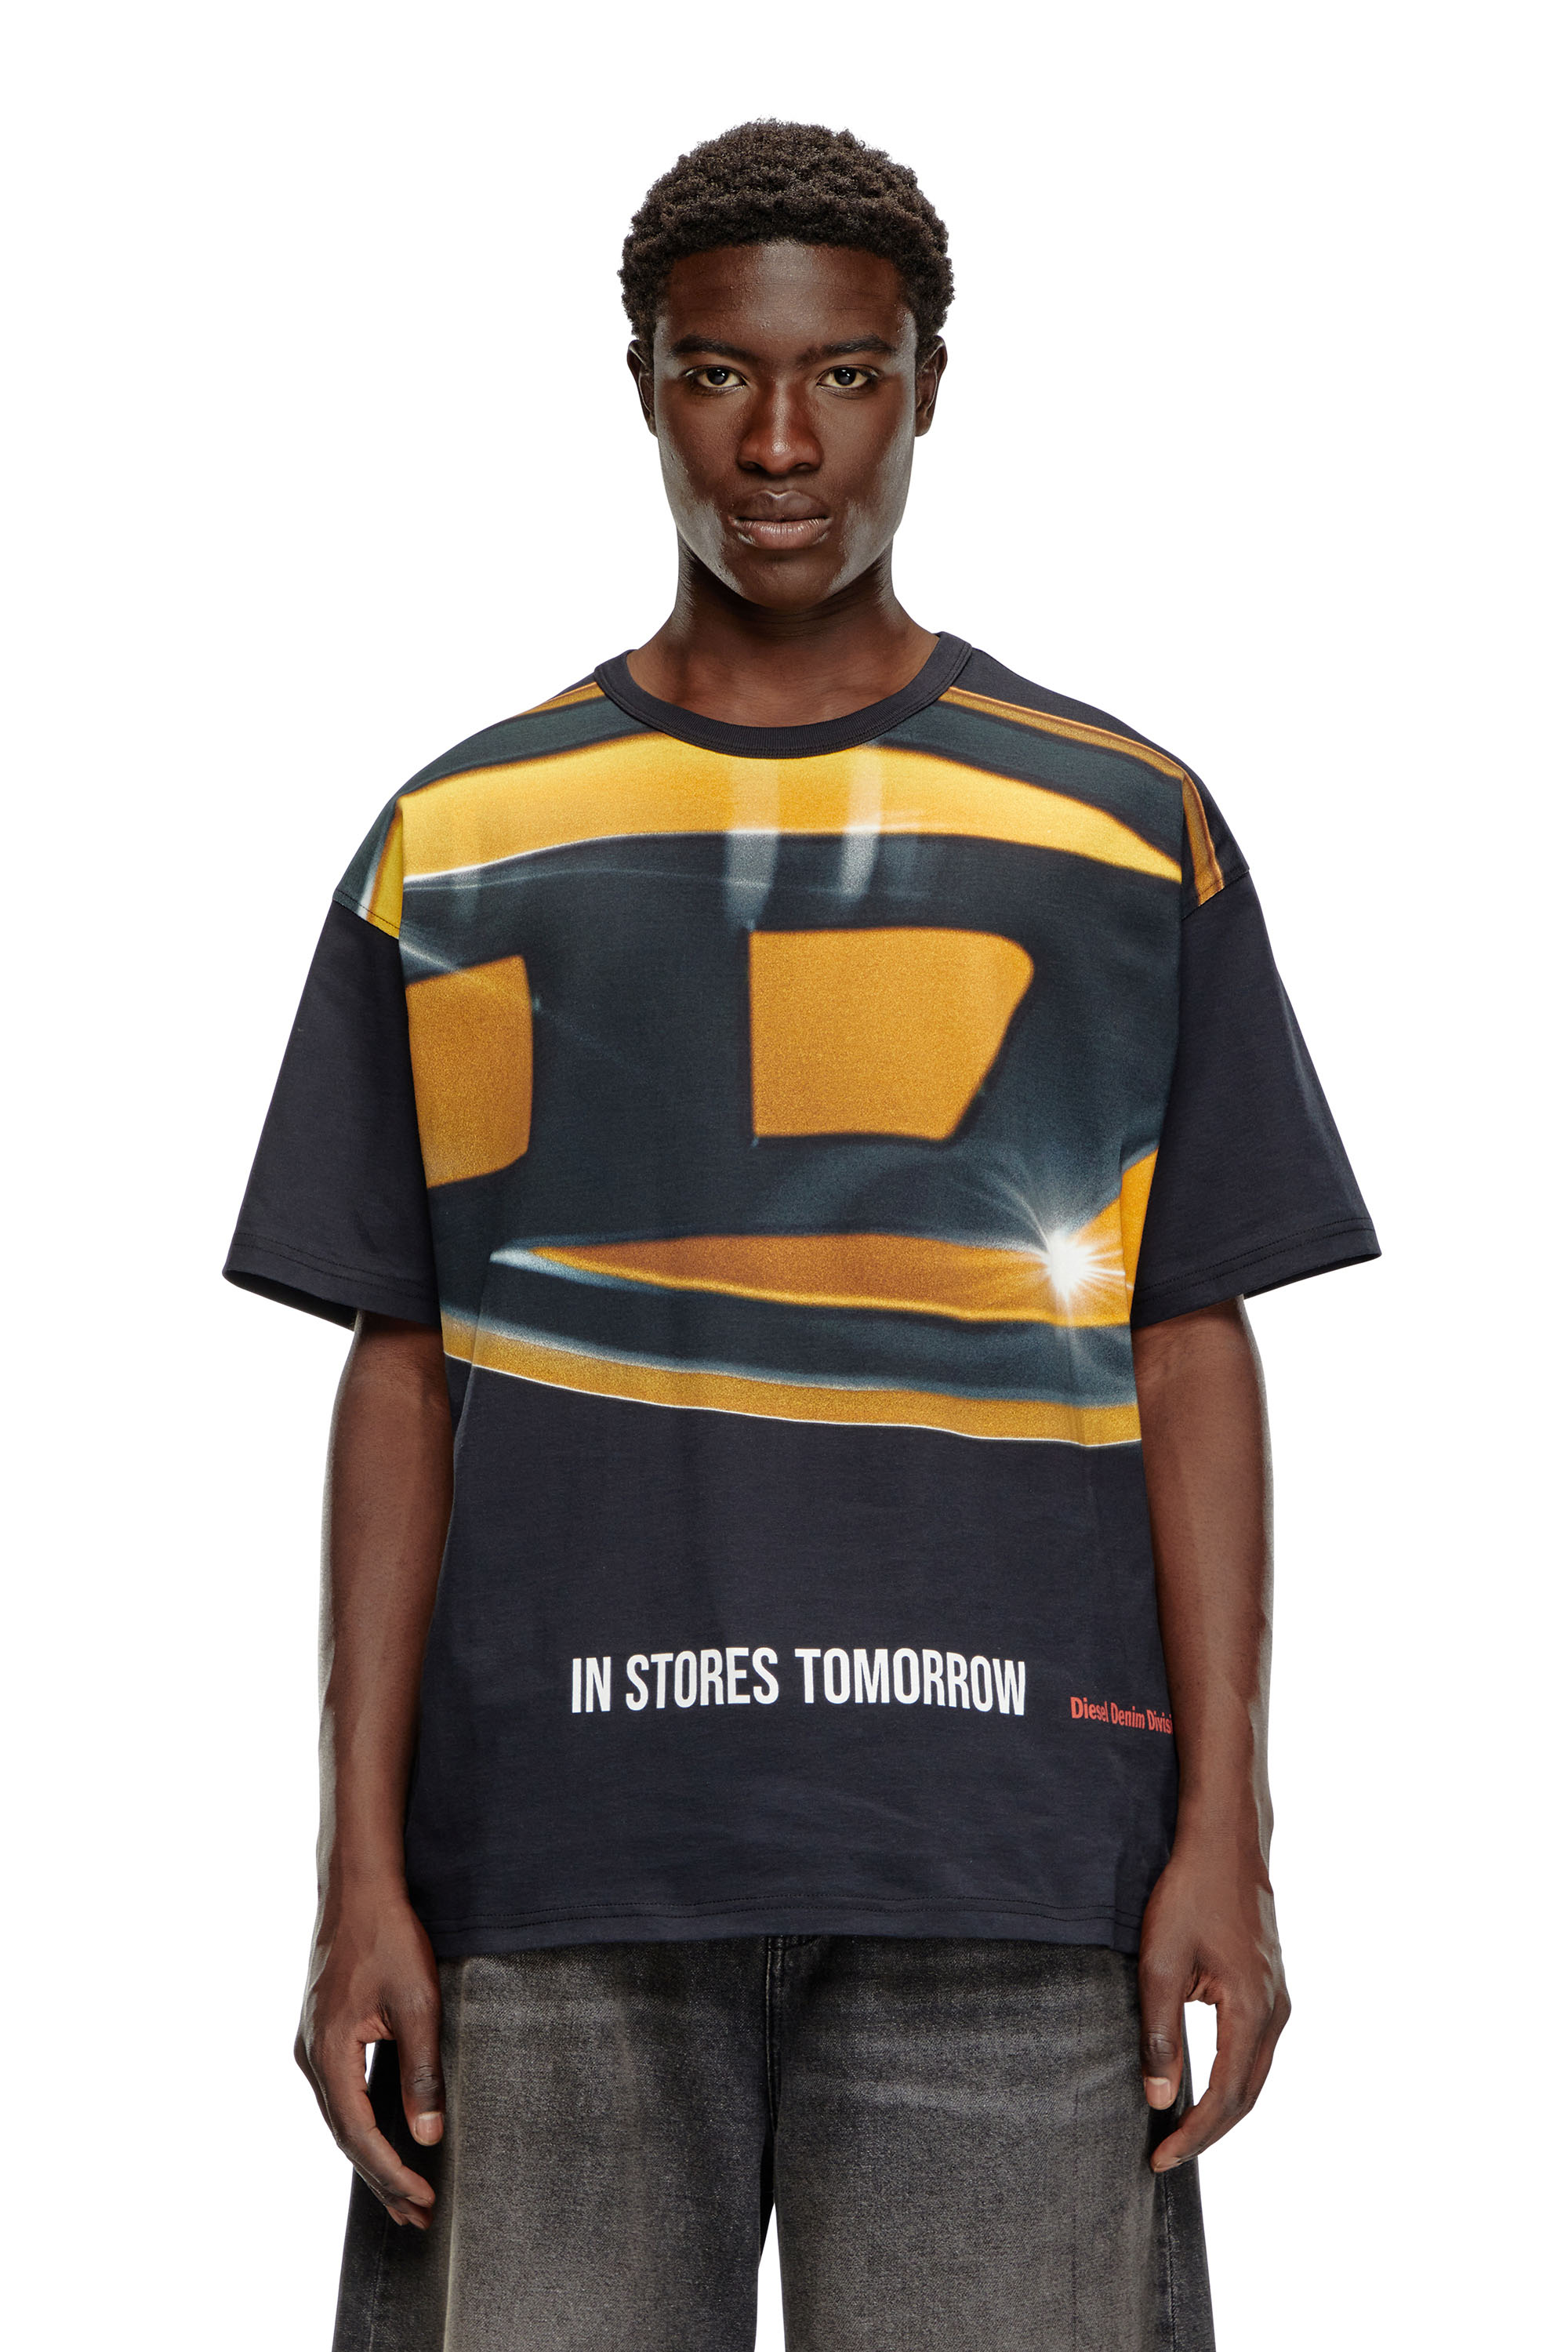 Diesel - T-BOXT-P1, Male T-shirt with Oval D poster print in ブラック - Image 5